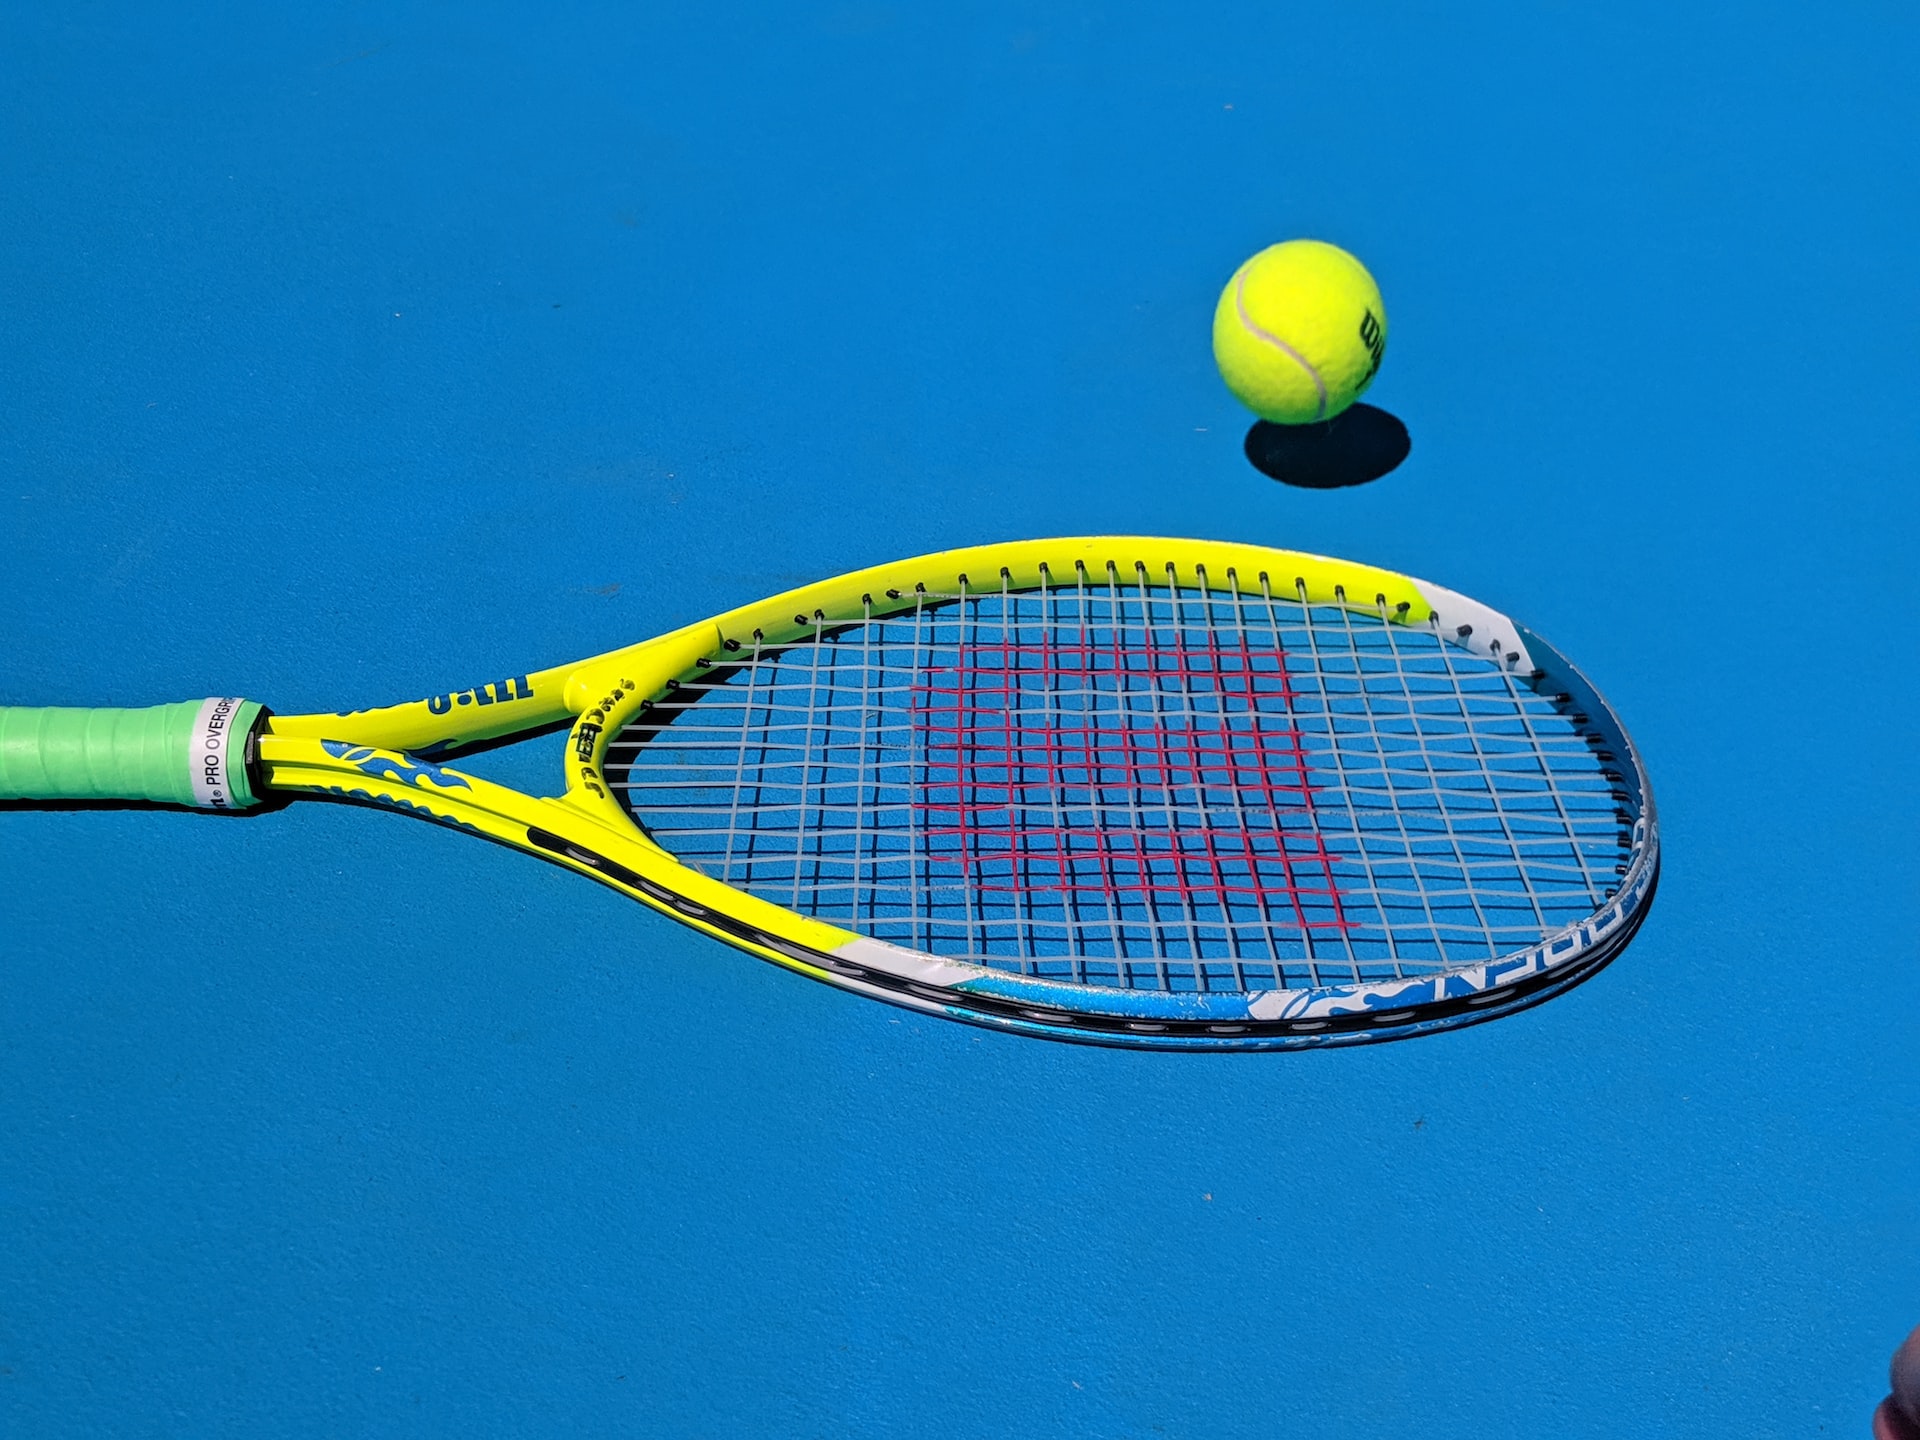 How to start practicing tennis?